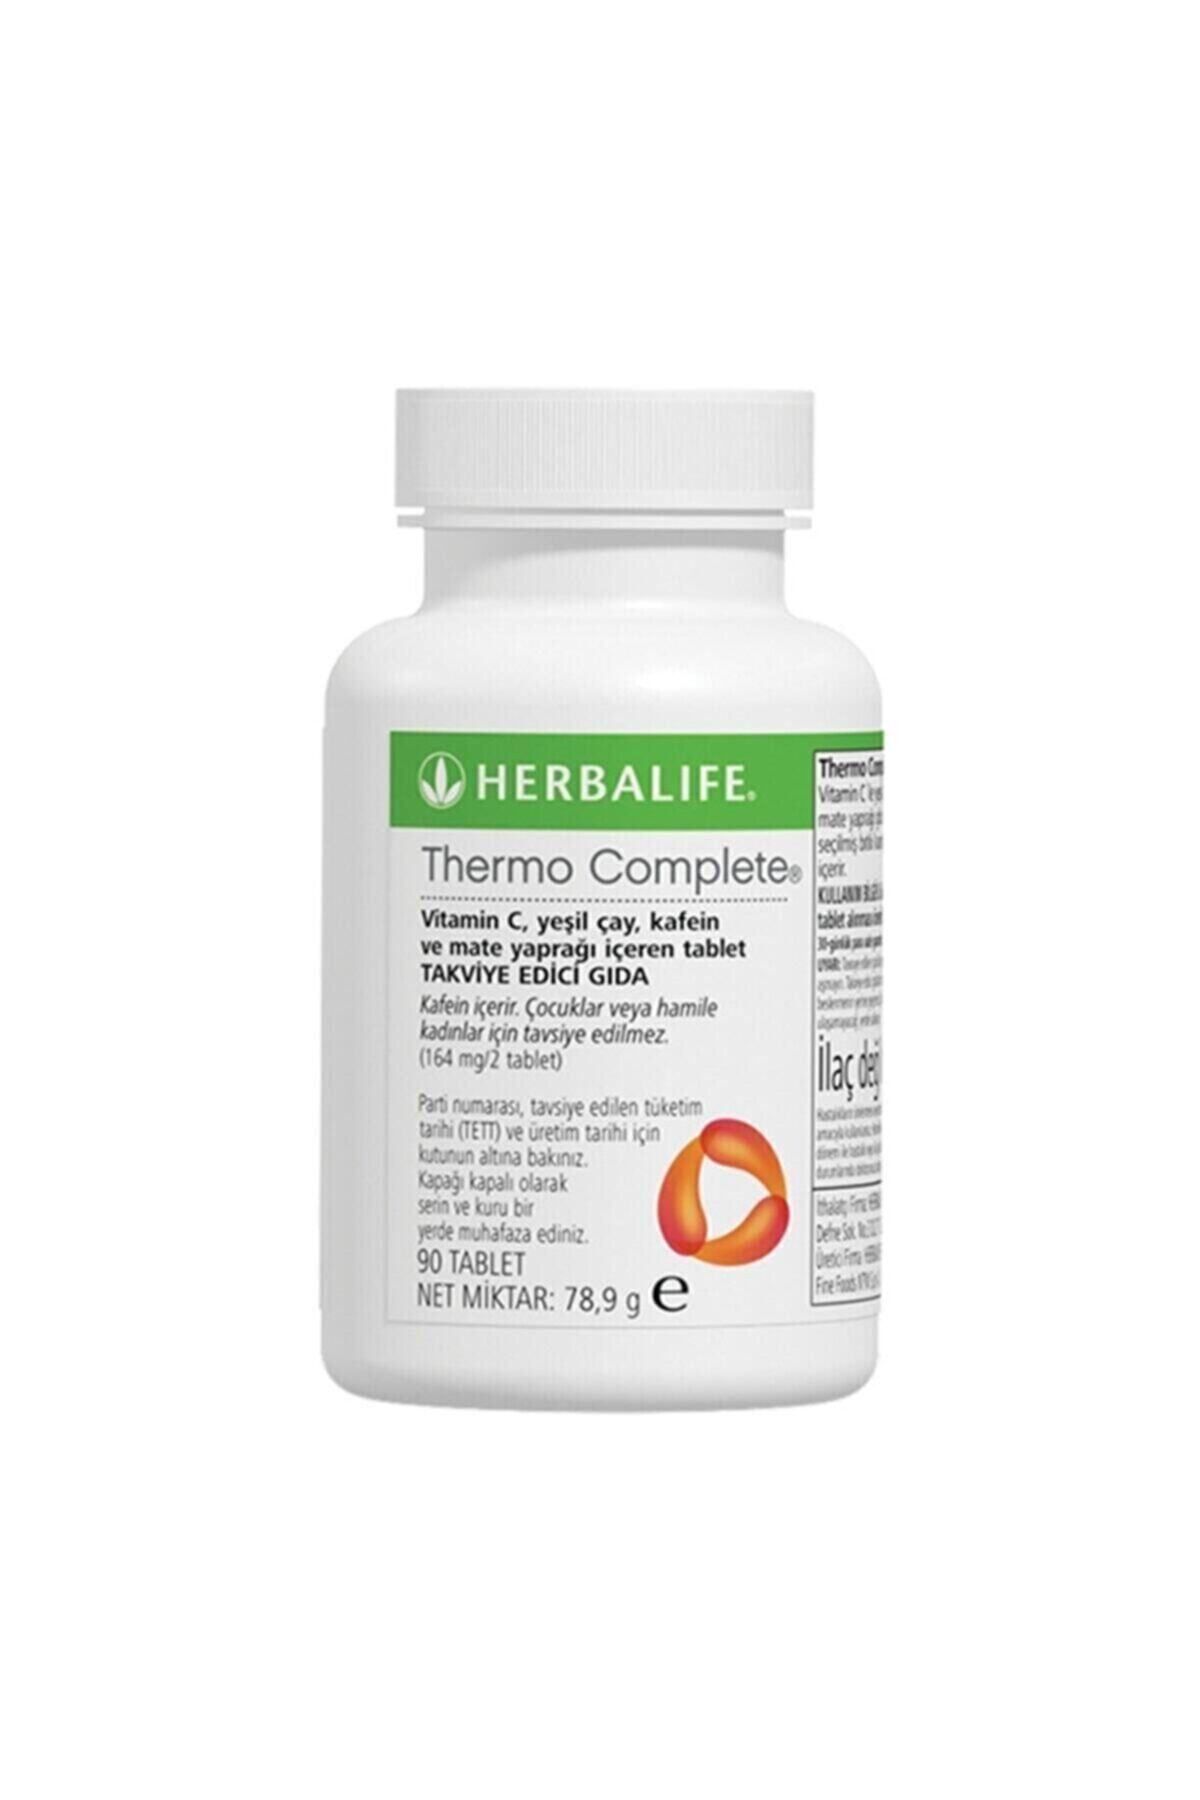 Herbalife Termo Complete 90 Tablet Termo Complete 90 Tablet